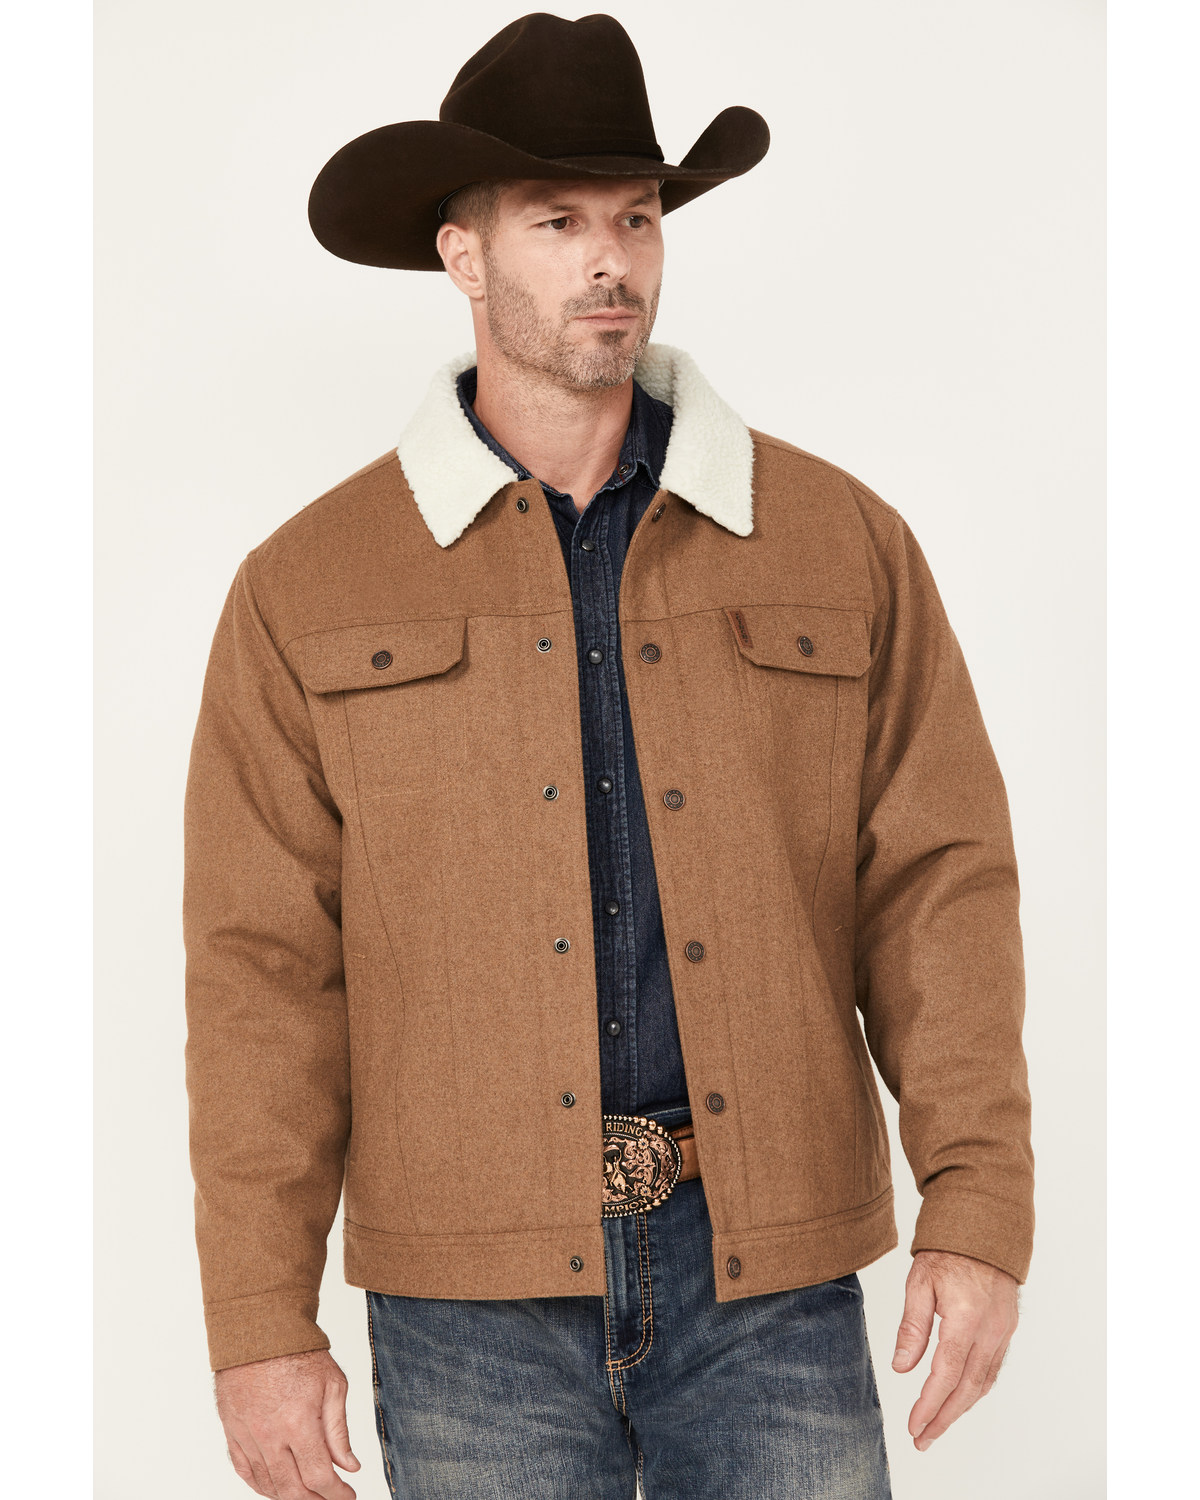 Cinch Men's Wool Sherpa Lined Concealed Carry Jacket